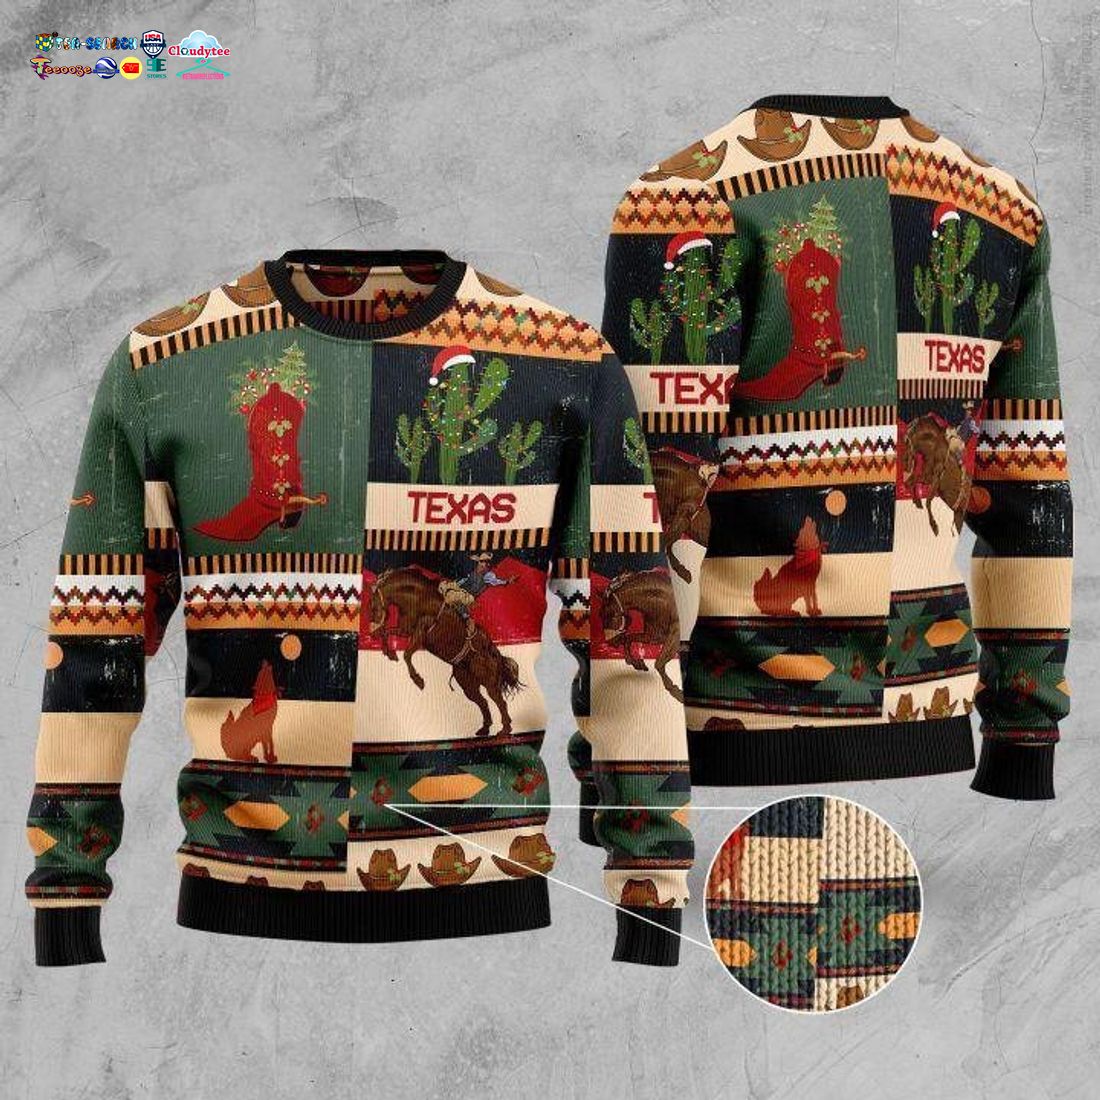 Texas Ugly Christmas Sweater - Radiant and glowing Pic dear